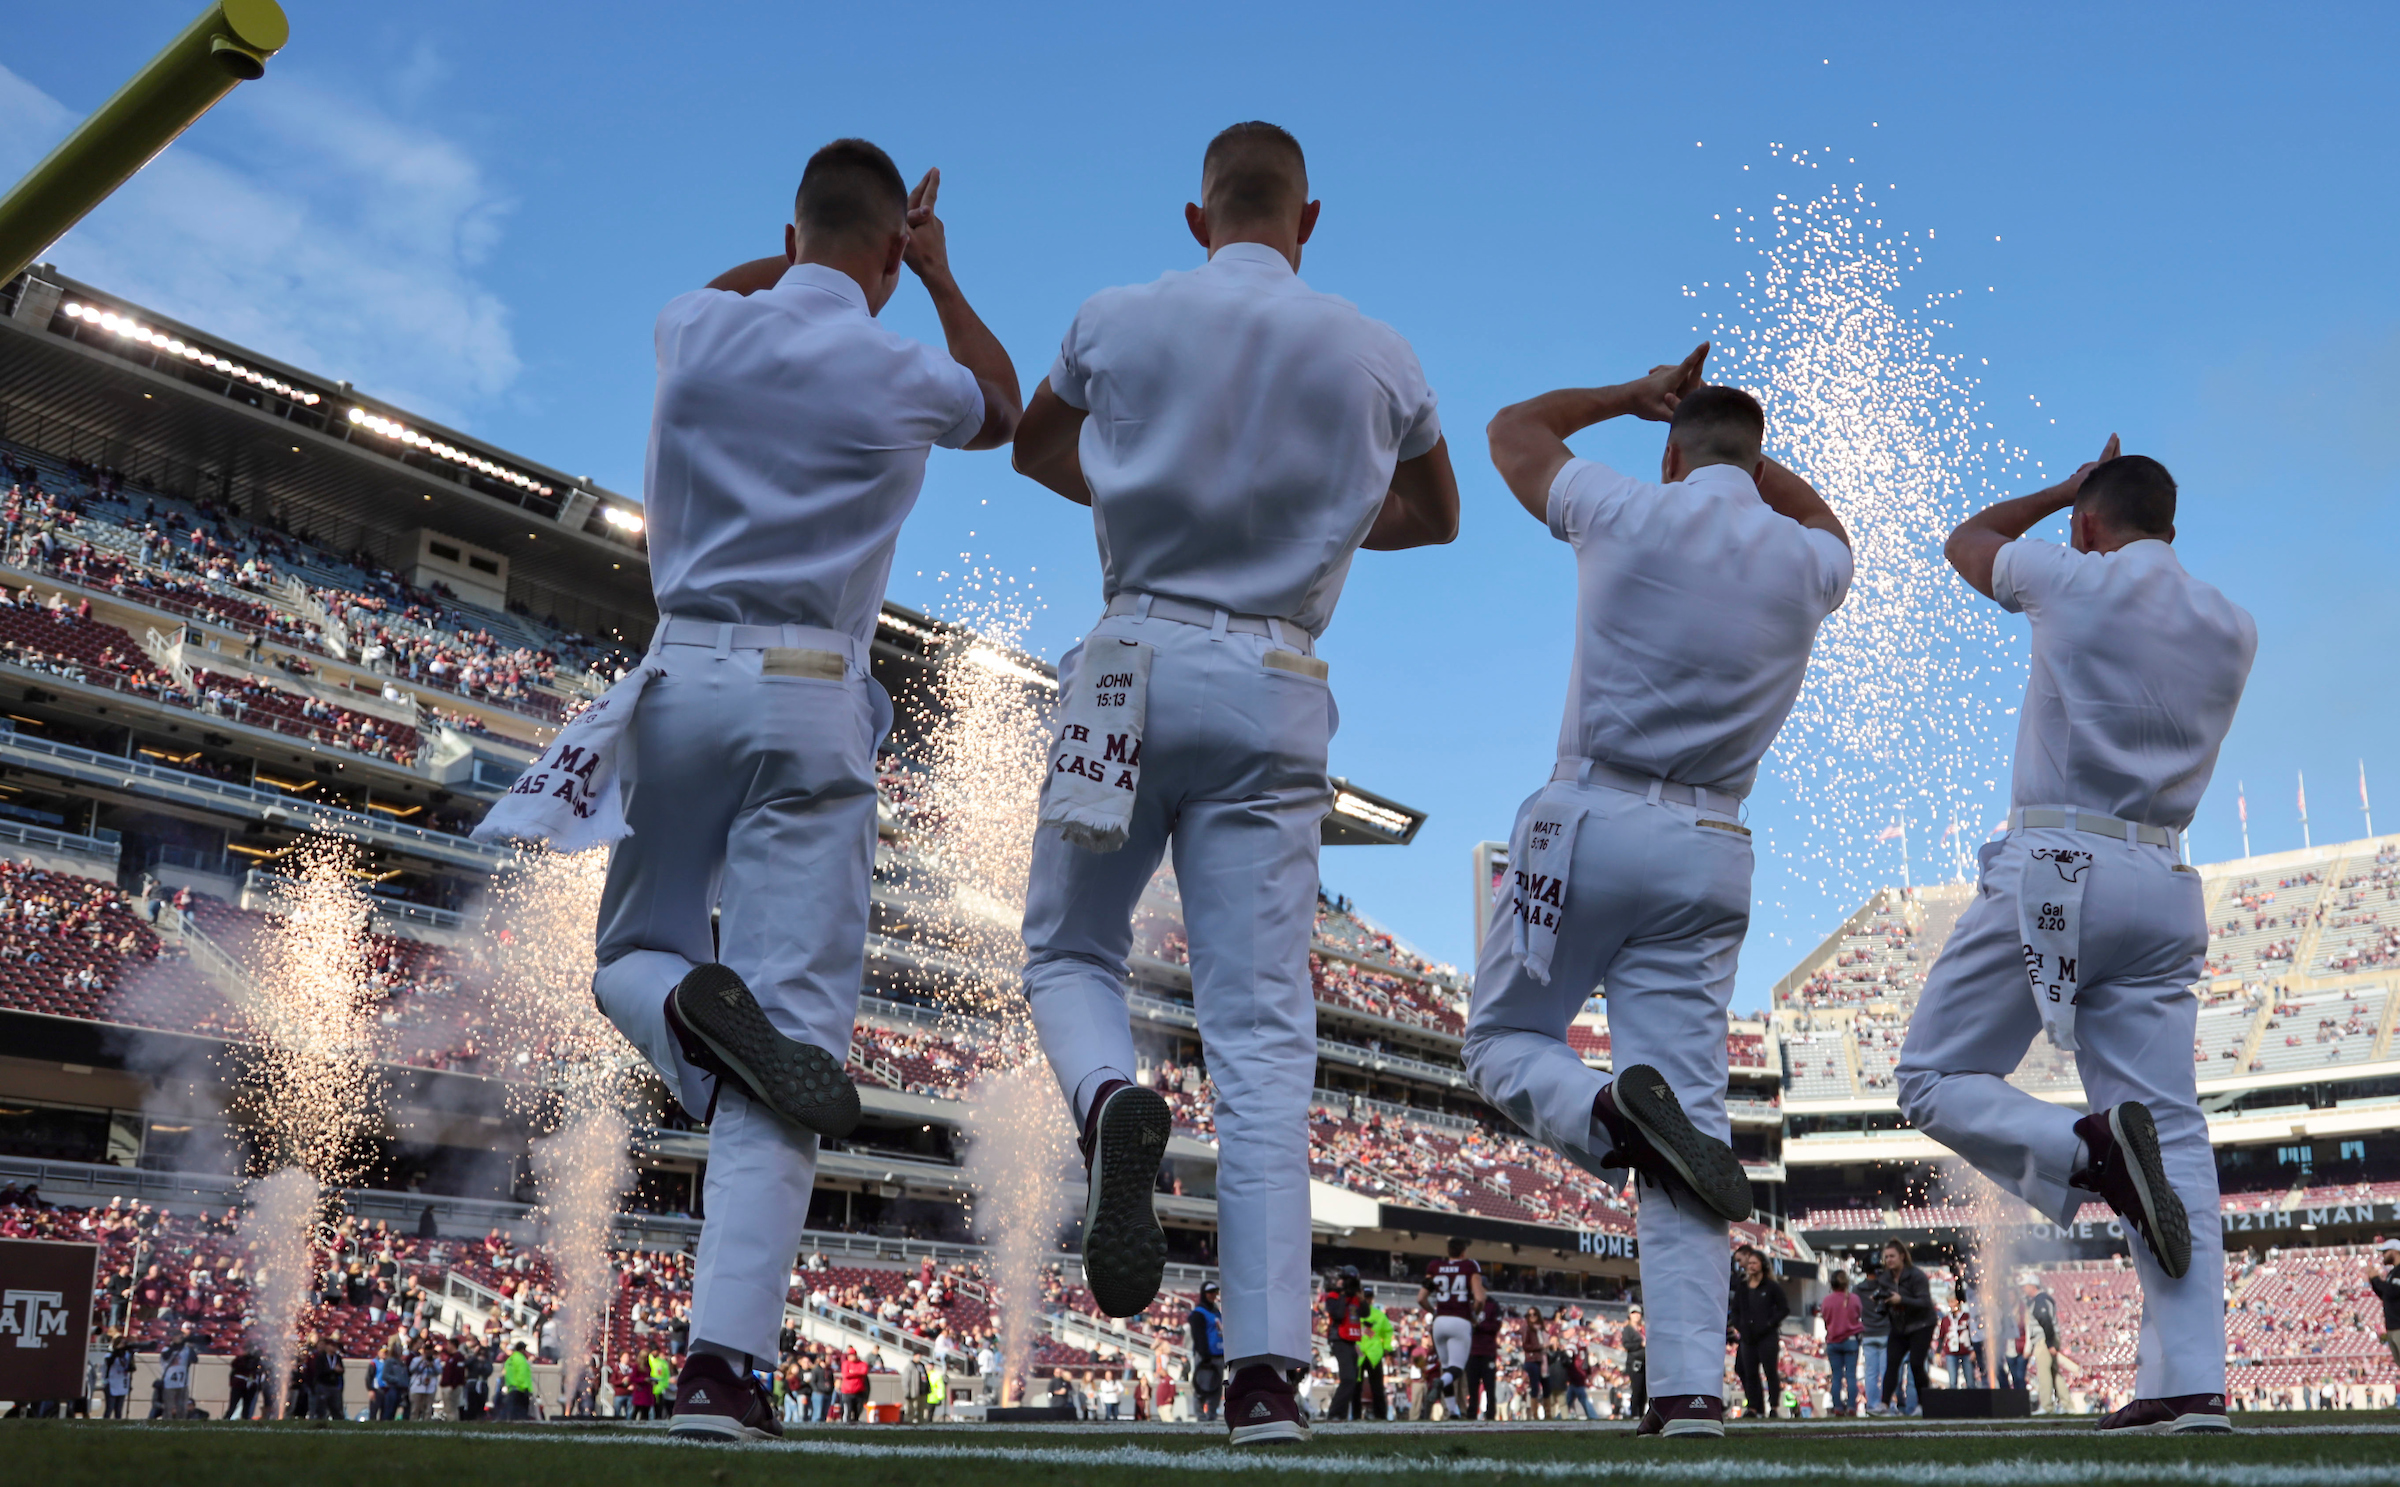 Image of 3 yell leaders leading a yell at a football game. 